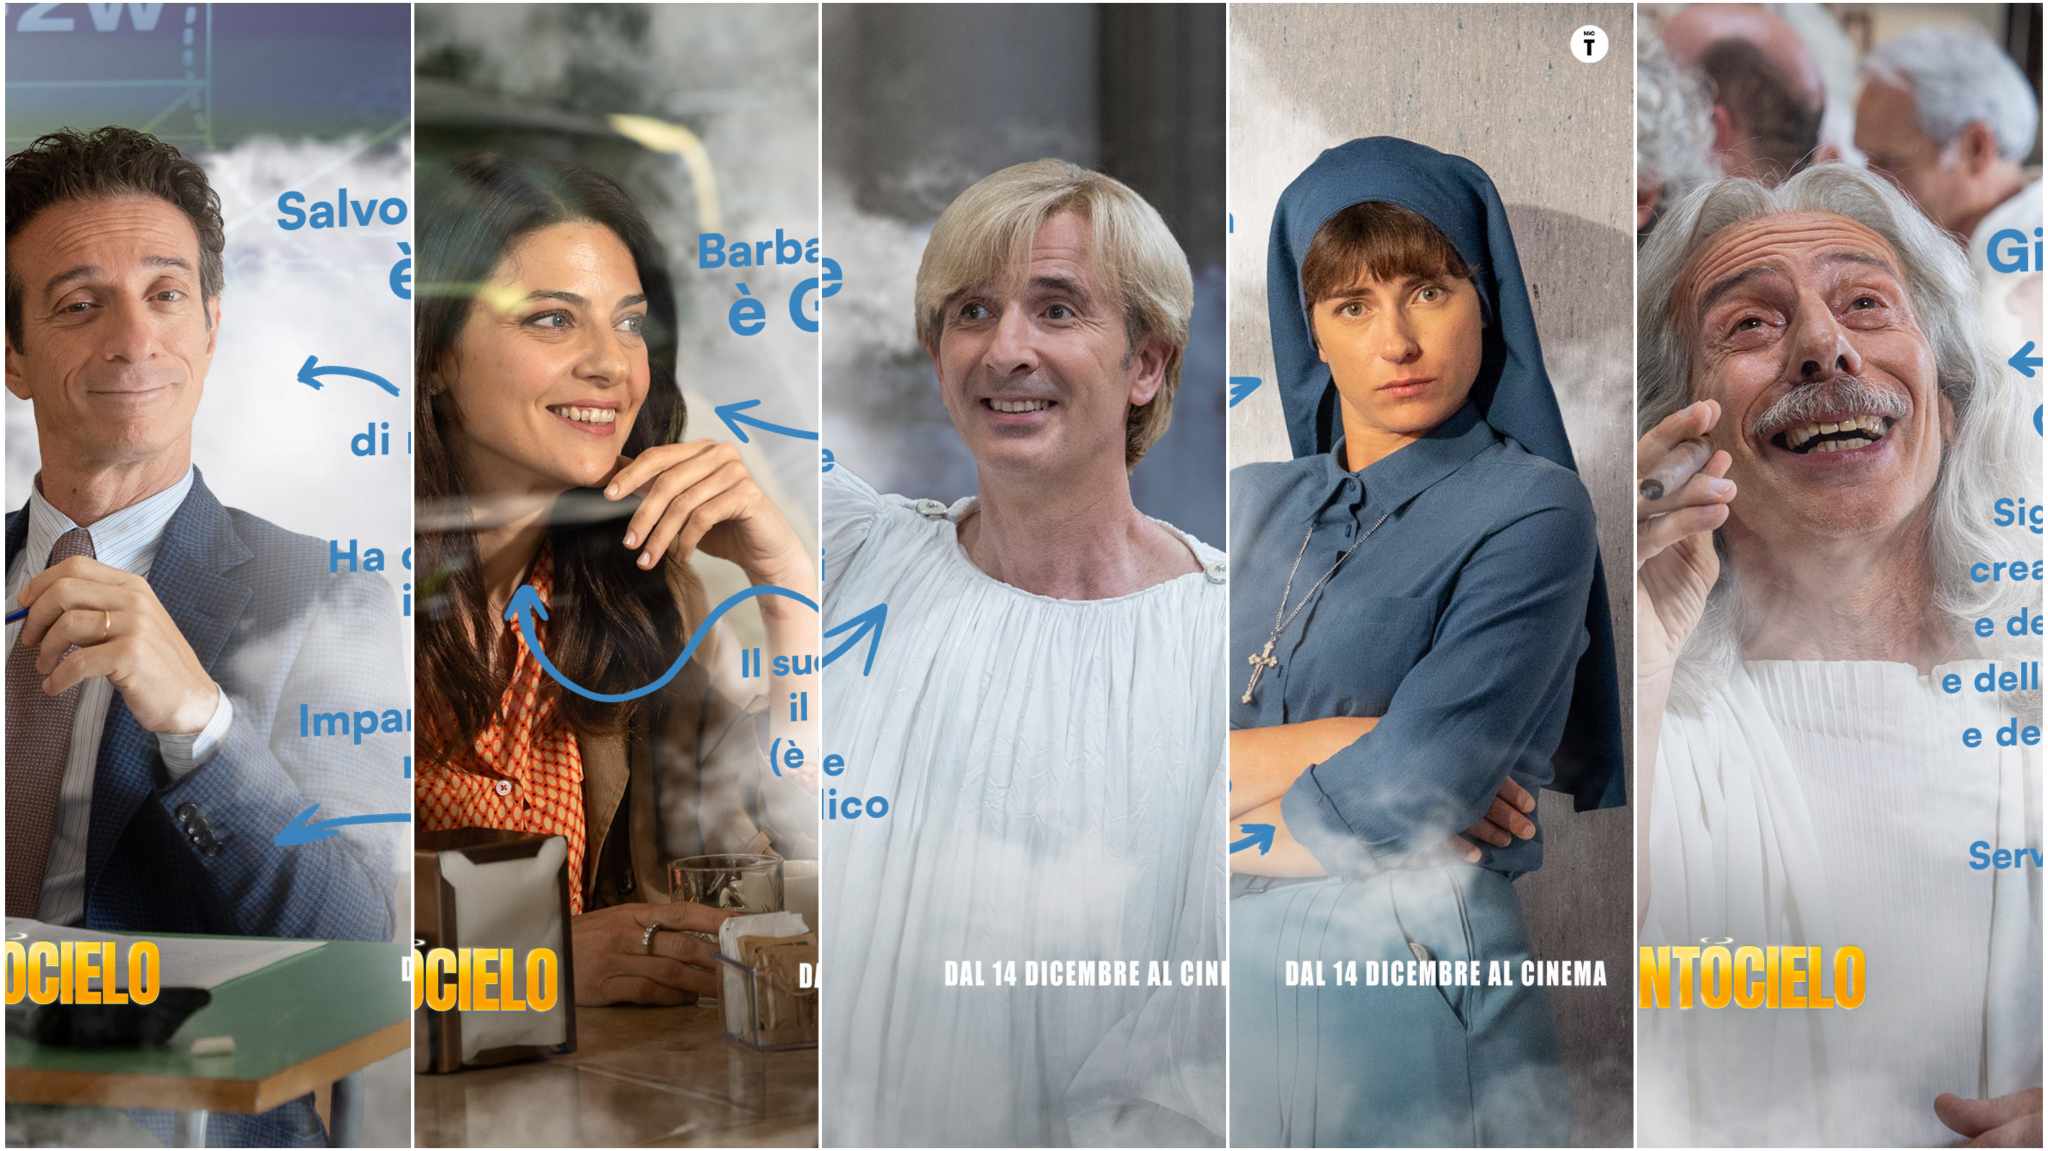 collage character poster santocielo